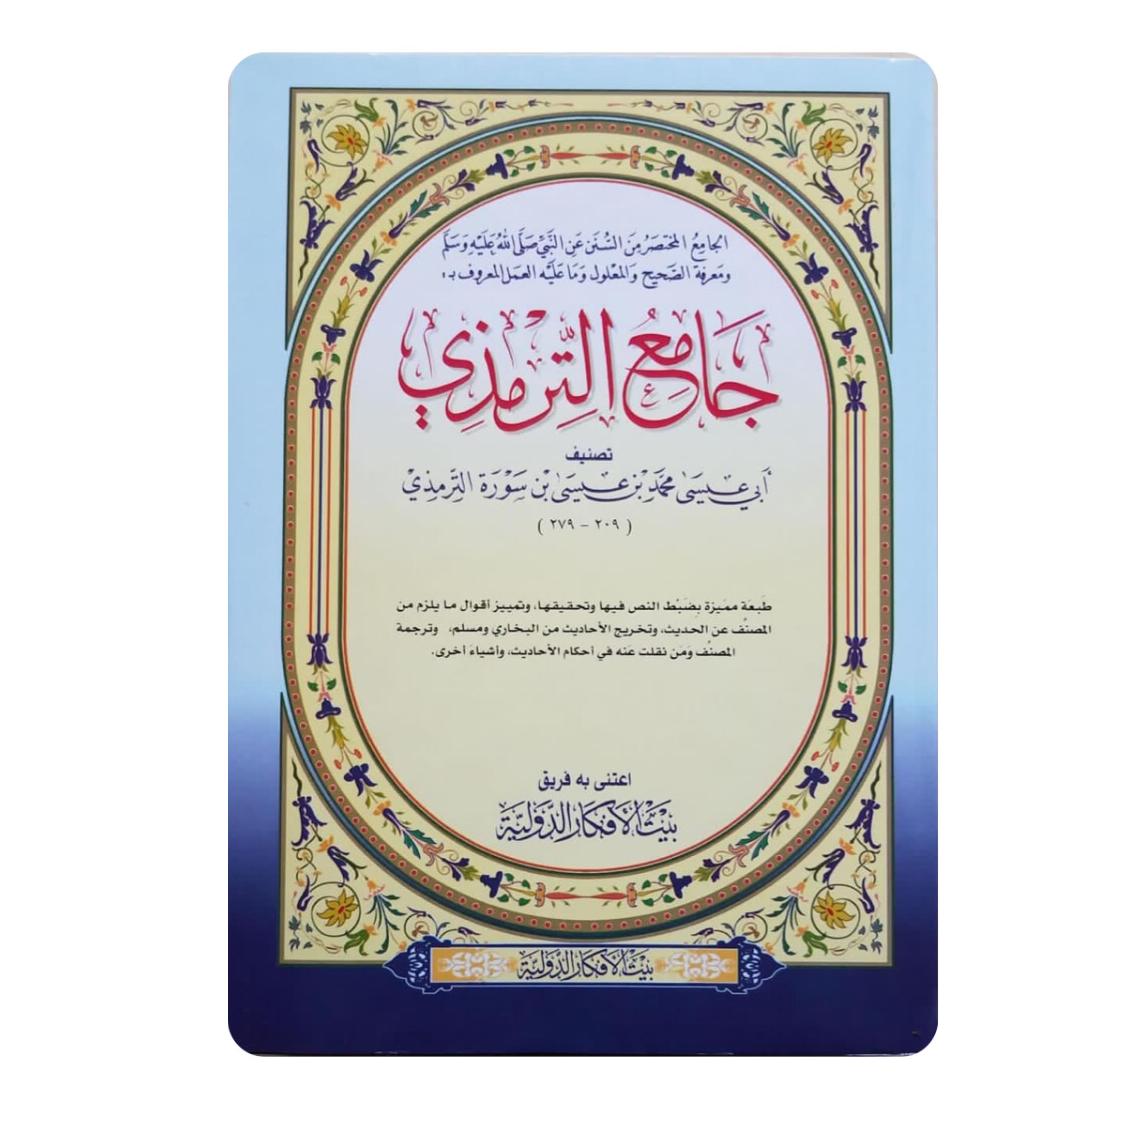 Sunan Ibn Majah is one of the books of the hadiths of the Prophet, and it is the sixth of the six books that are the origins of the noble Prophet